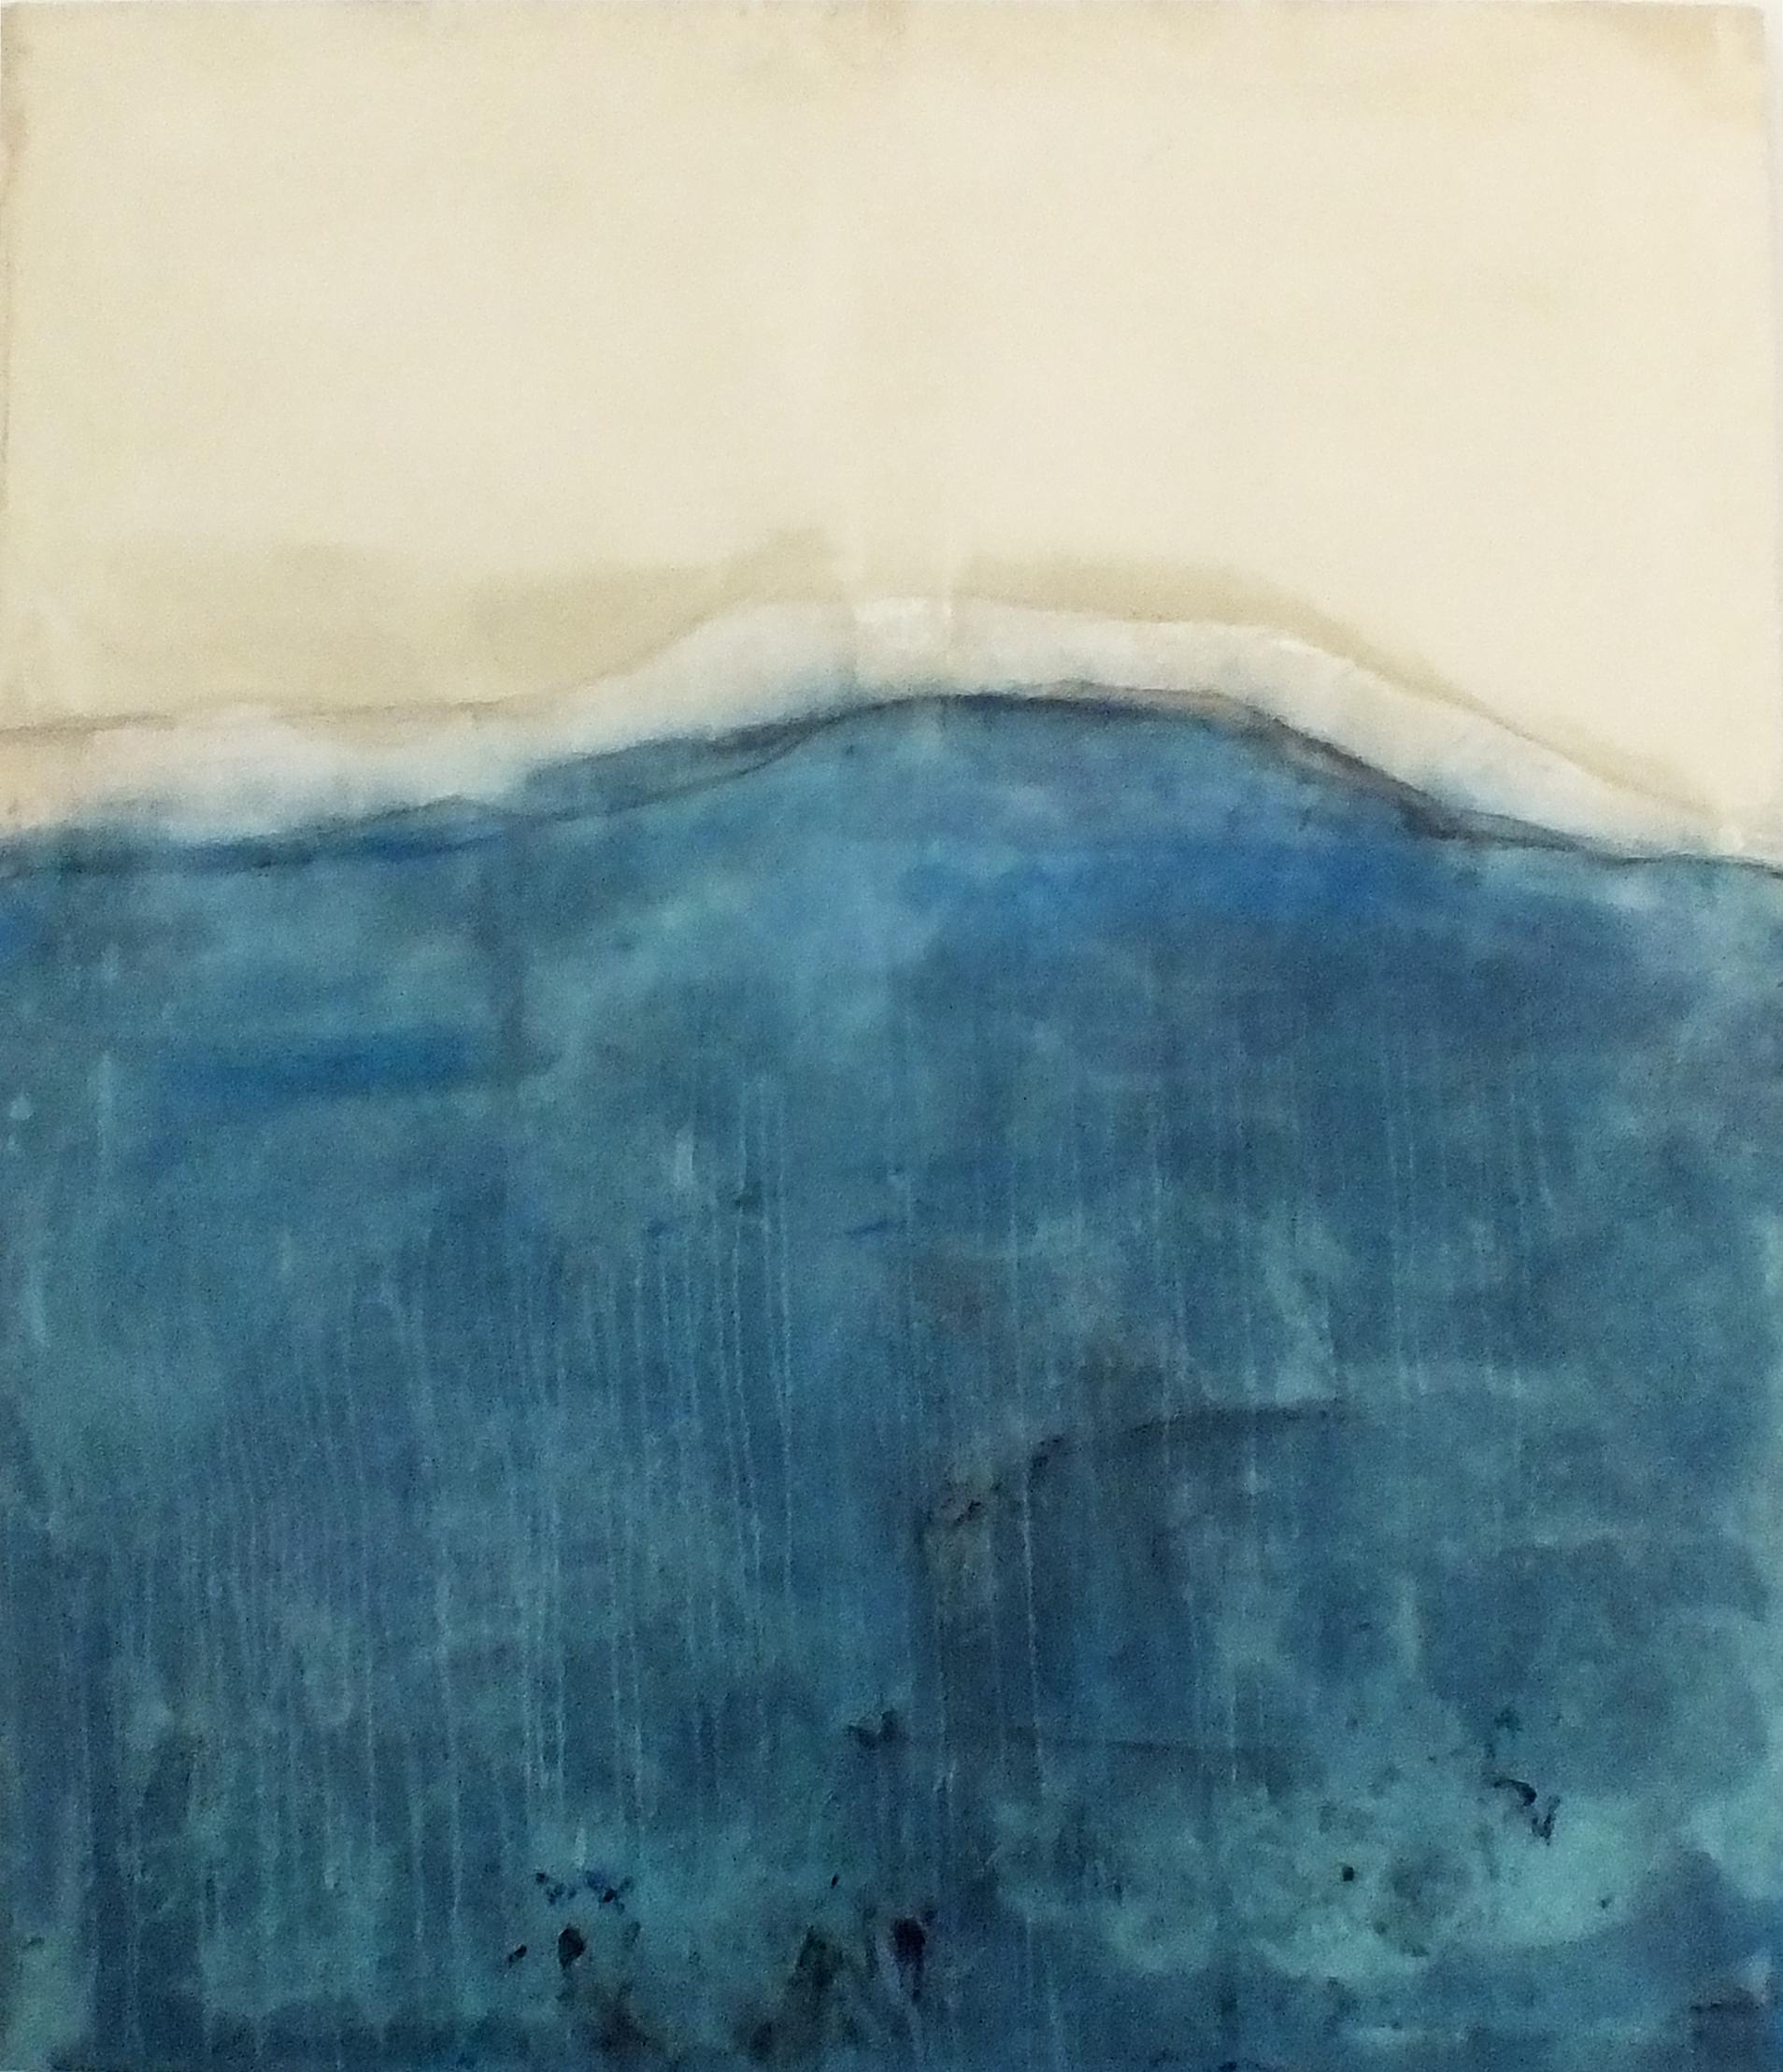 Landscape
deepblue
mixed media on linen canvas
120x135 cm
2020

Original Created:2020
Subjects:Landscape
Materials:CanvasSoft (Yarn, Cotton, Fabric)

Marilina Marchica, born in Agrigento, where she works and lives,
she graduated in Painting at the